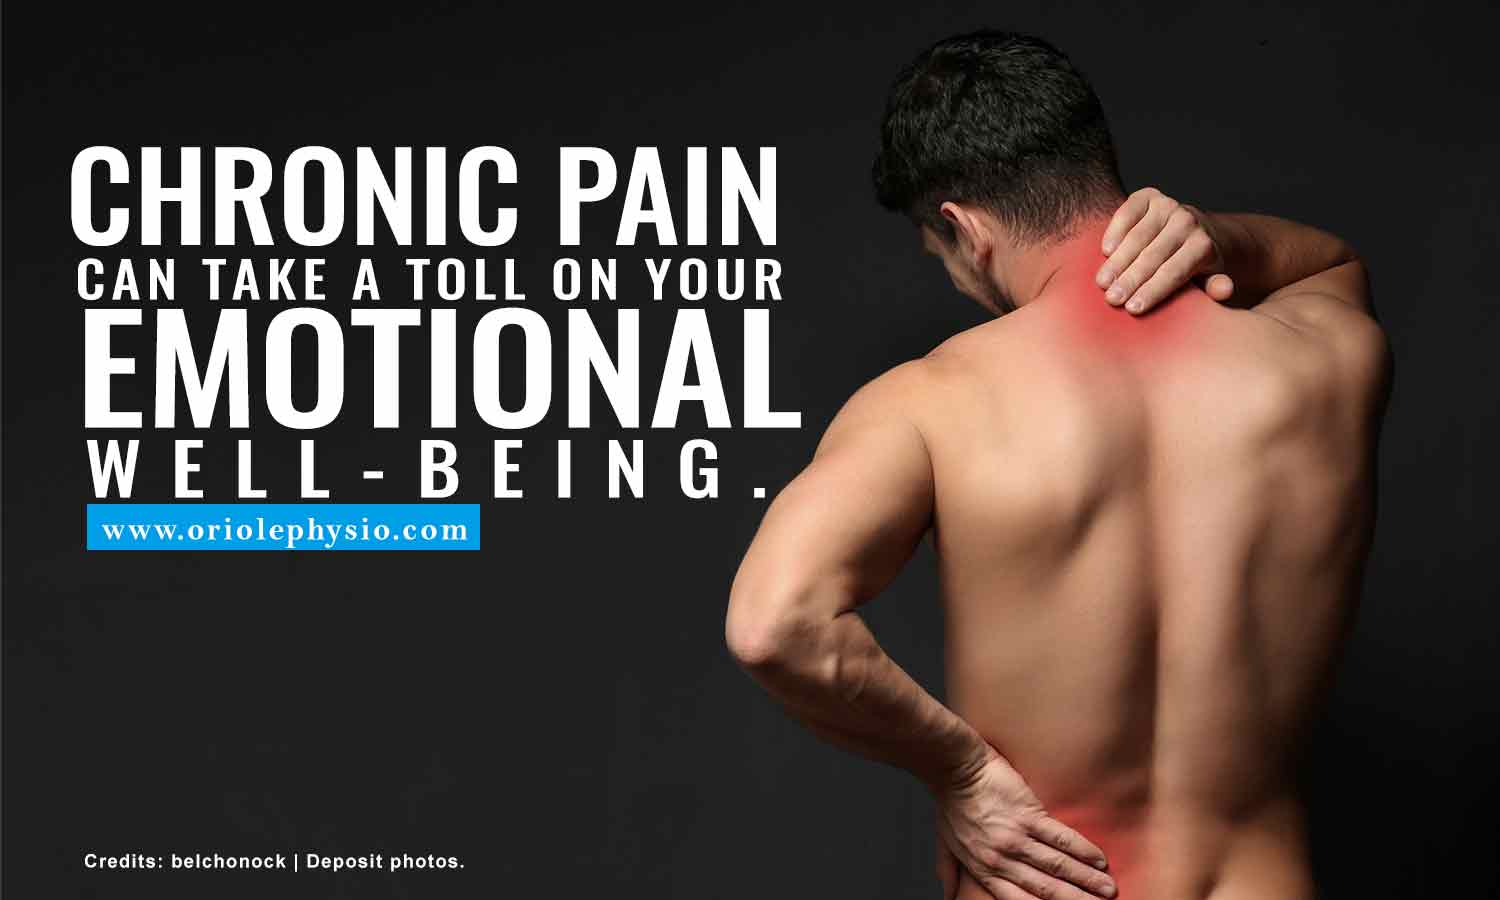 Chronic pain can take a toll on your emotional well-being.